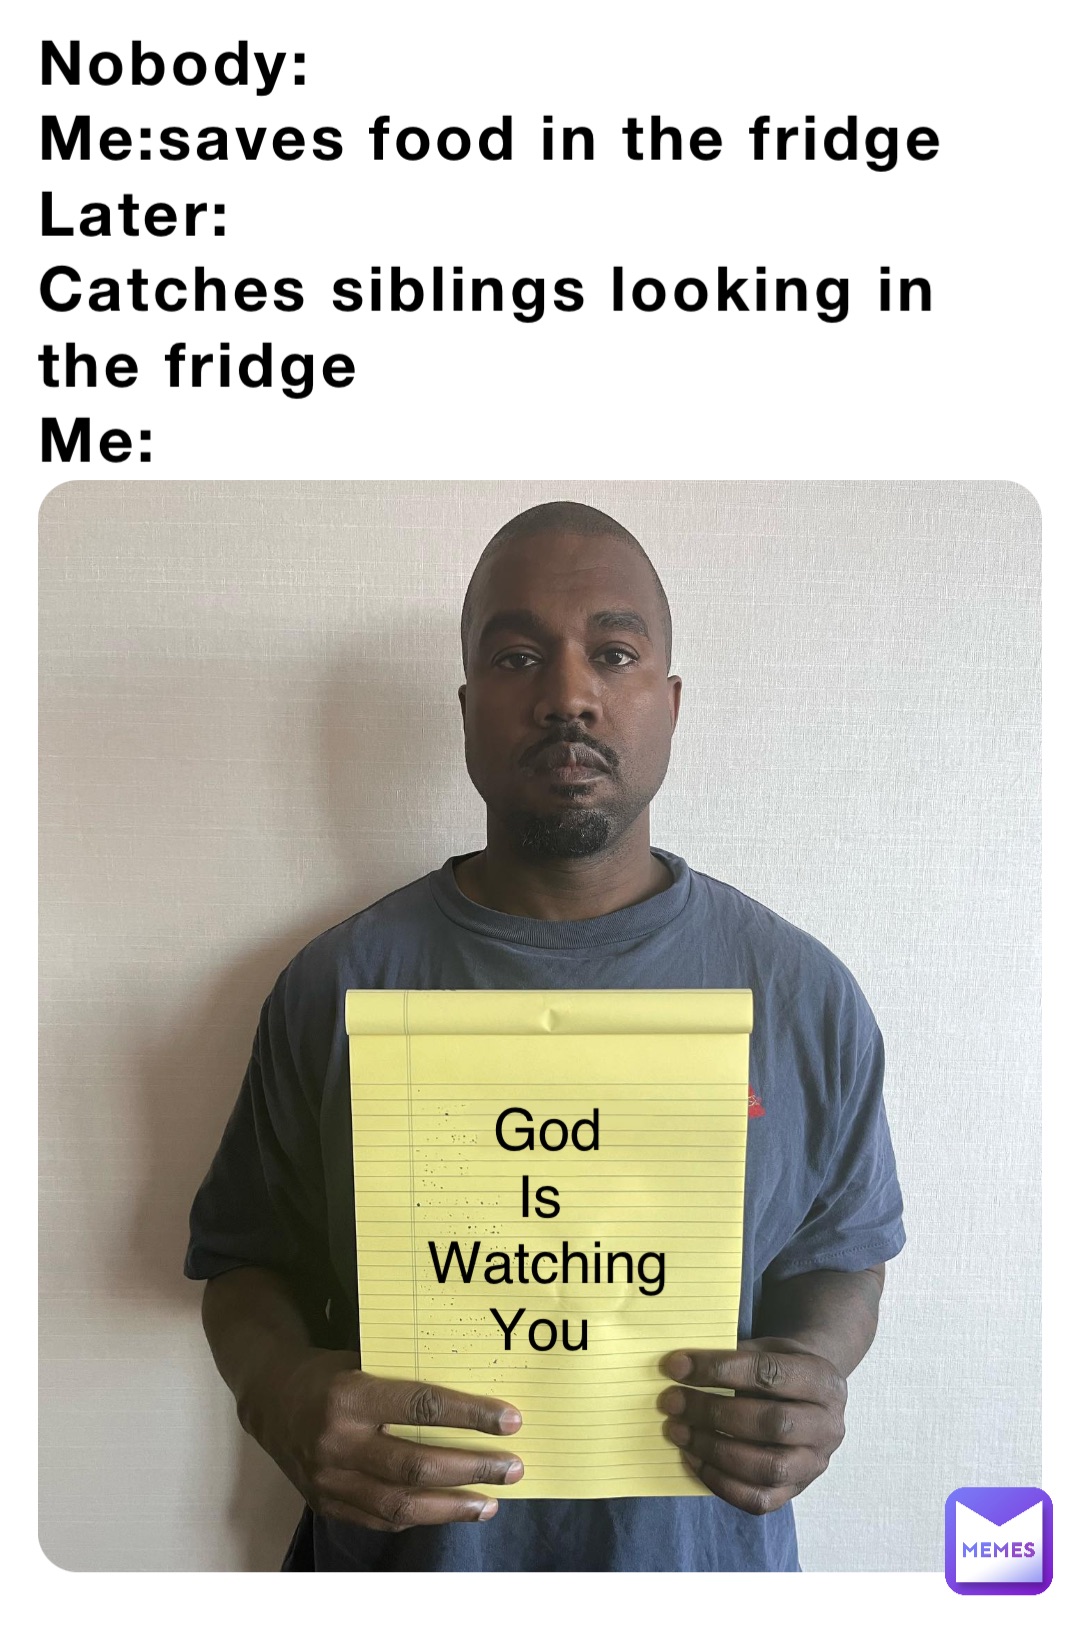 Nobody:
Me:saves food in the fridge 
Later:
Catches siblings looking in the fridge
Me: God 
Is
Watching 
You